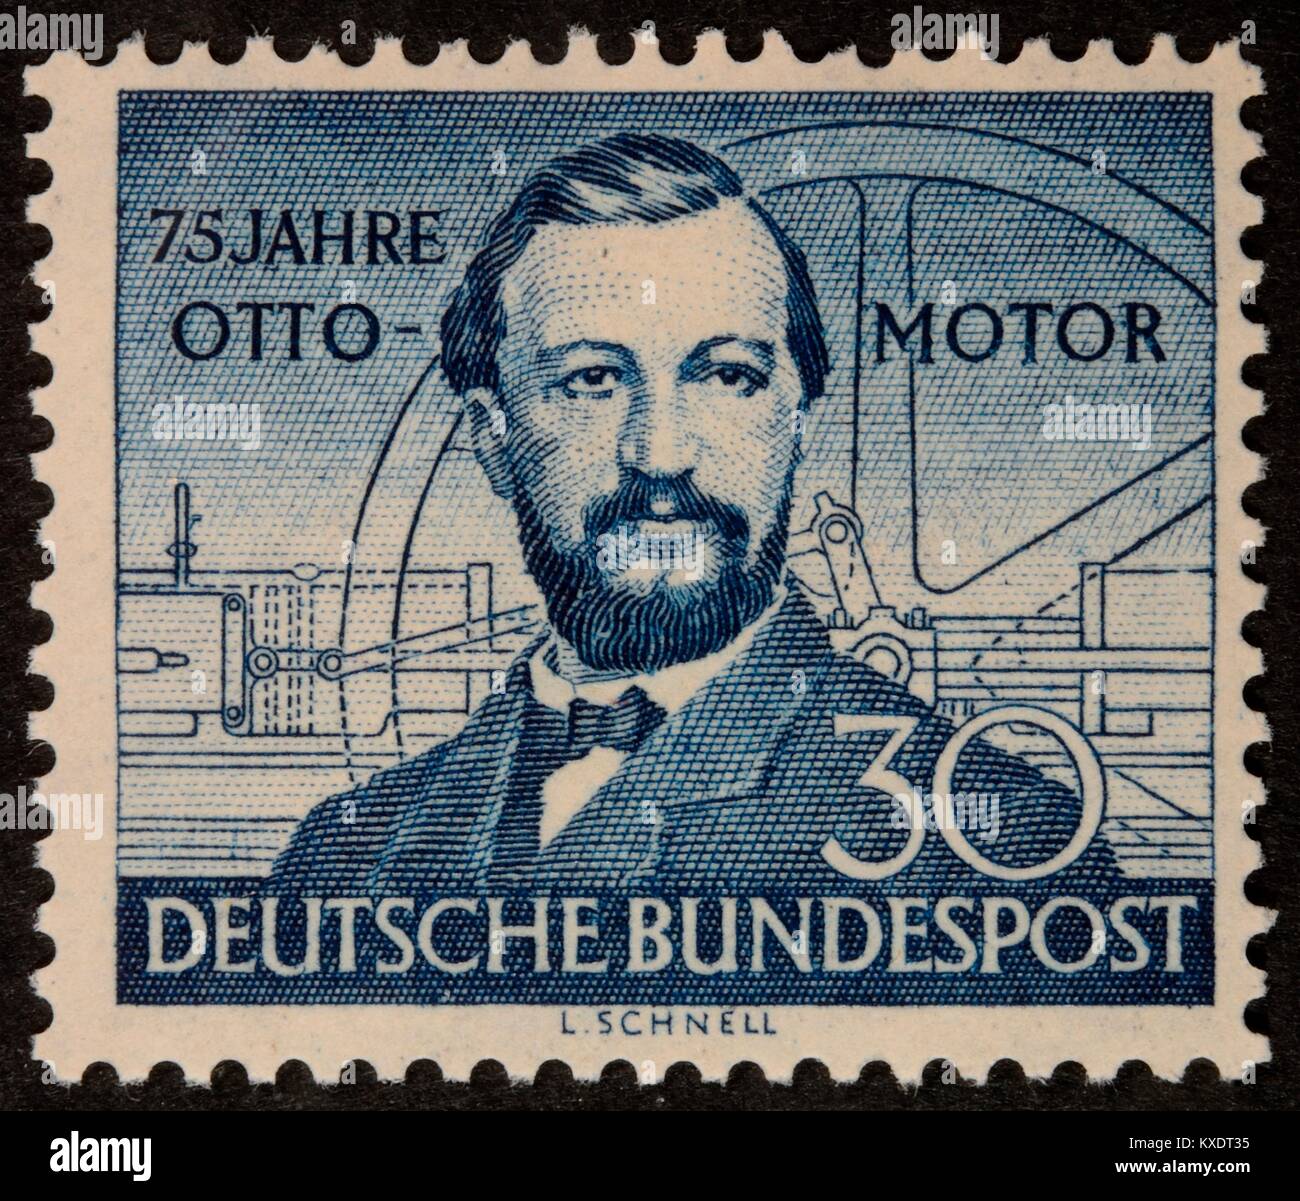 Nicolaus Otto, a German engineer who developed the four-stroke internal-combustion engine, portrait on a German stamp 1952 Stock Photo